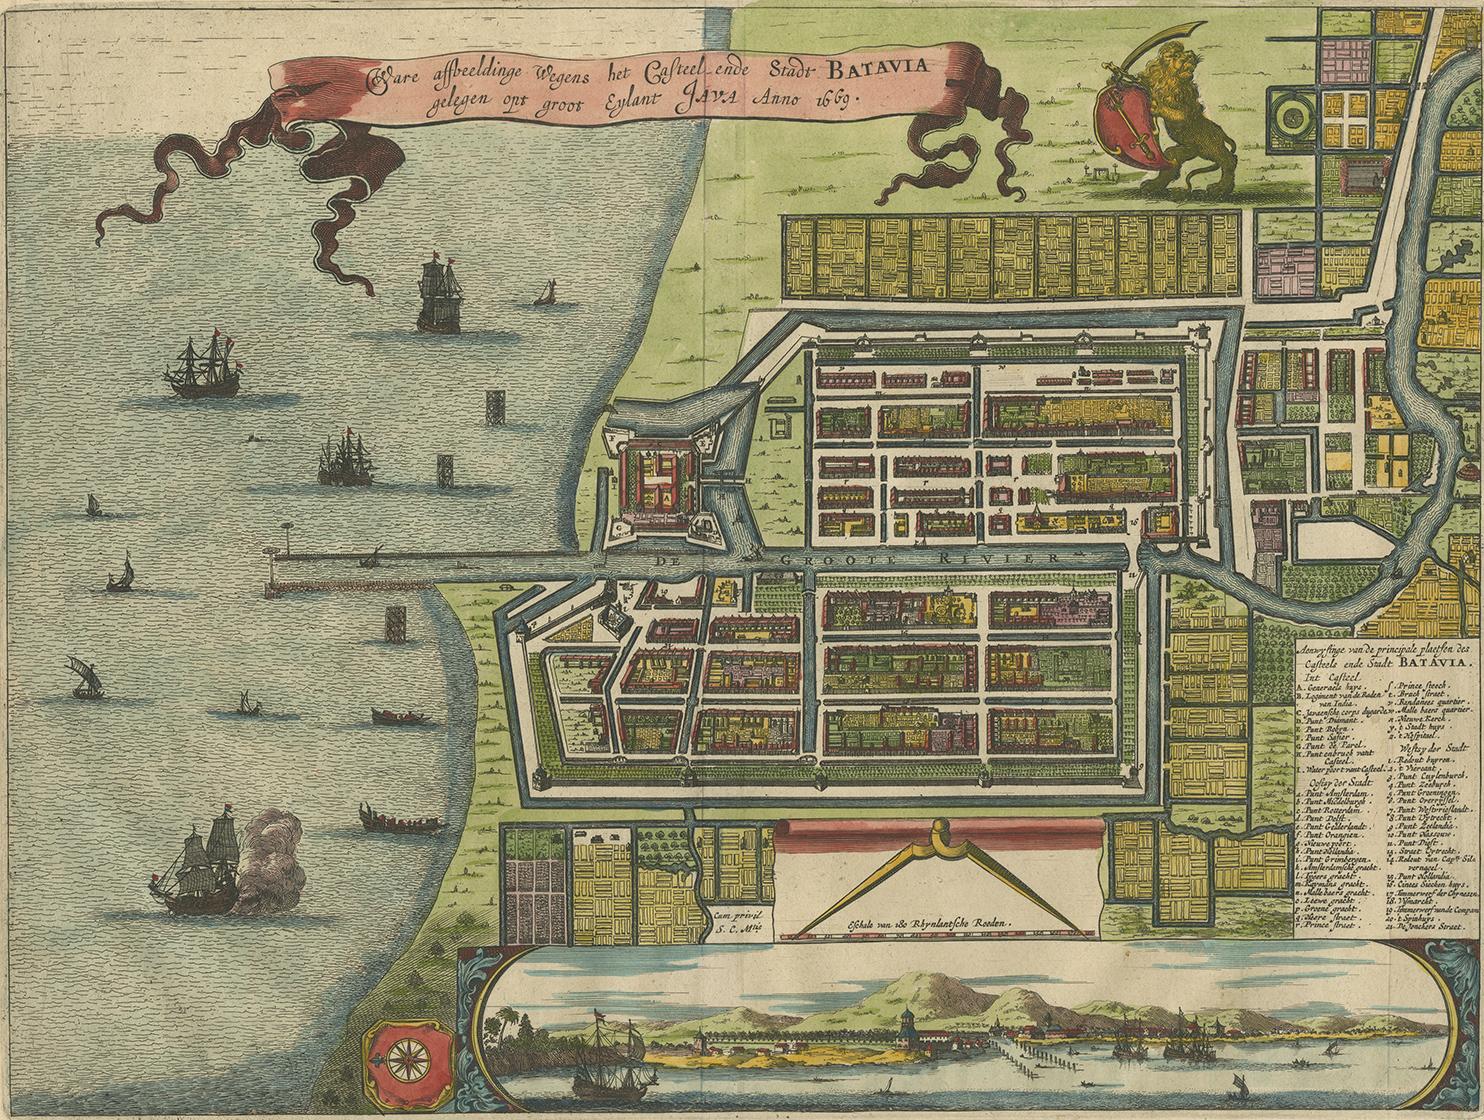 Fine early plan of Batavia (Jakarta), published by Arnoldus Montanus. This map has a vignette at the bottom showing Jakarta from the sea with the volcanoes Mount Gede, Mount Pangrnago and Mount Salak in the background. The plan is based on the